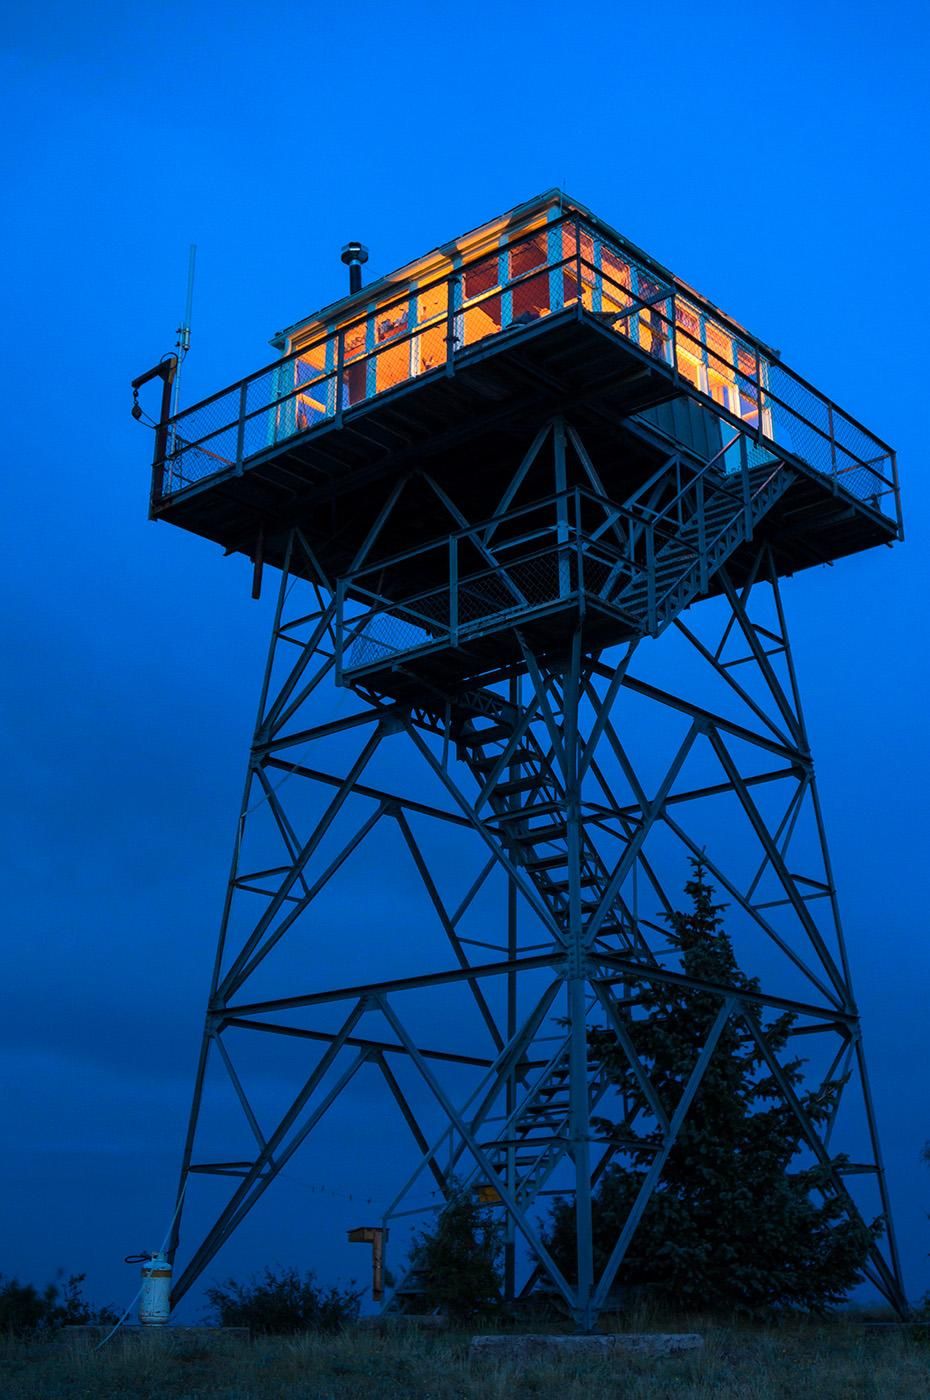 Female Fire Lookouts Have Been Saving the Wilderness for Over a Century